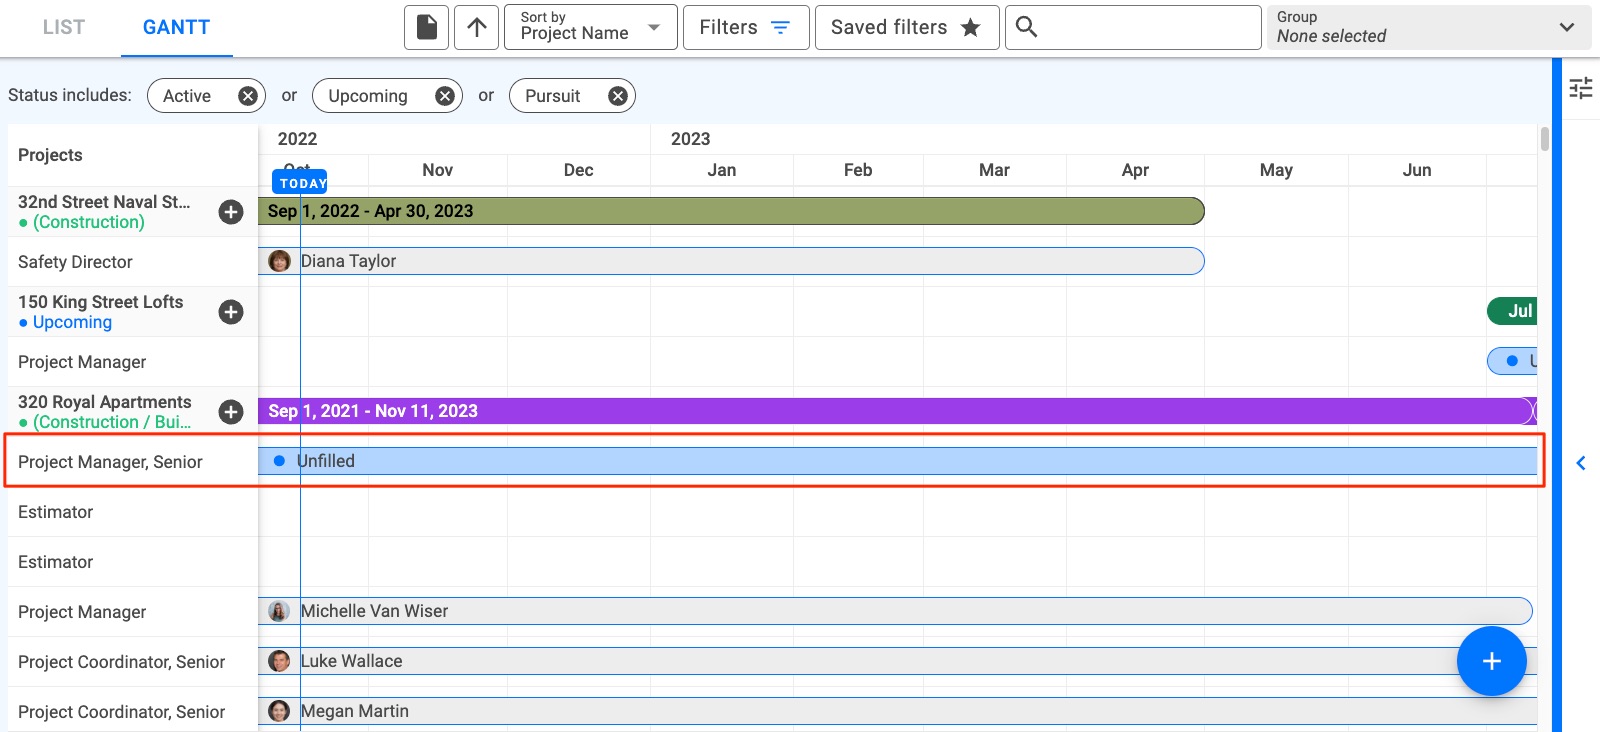 Article_Update_-_Managing_Roles_and_Allocations_From_the_Project_Gantt_-_1_4.jpg